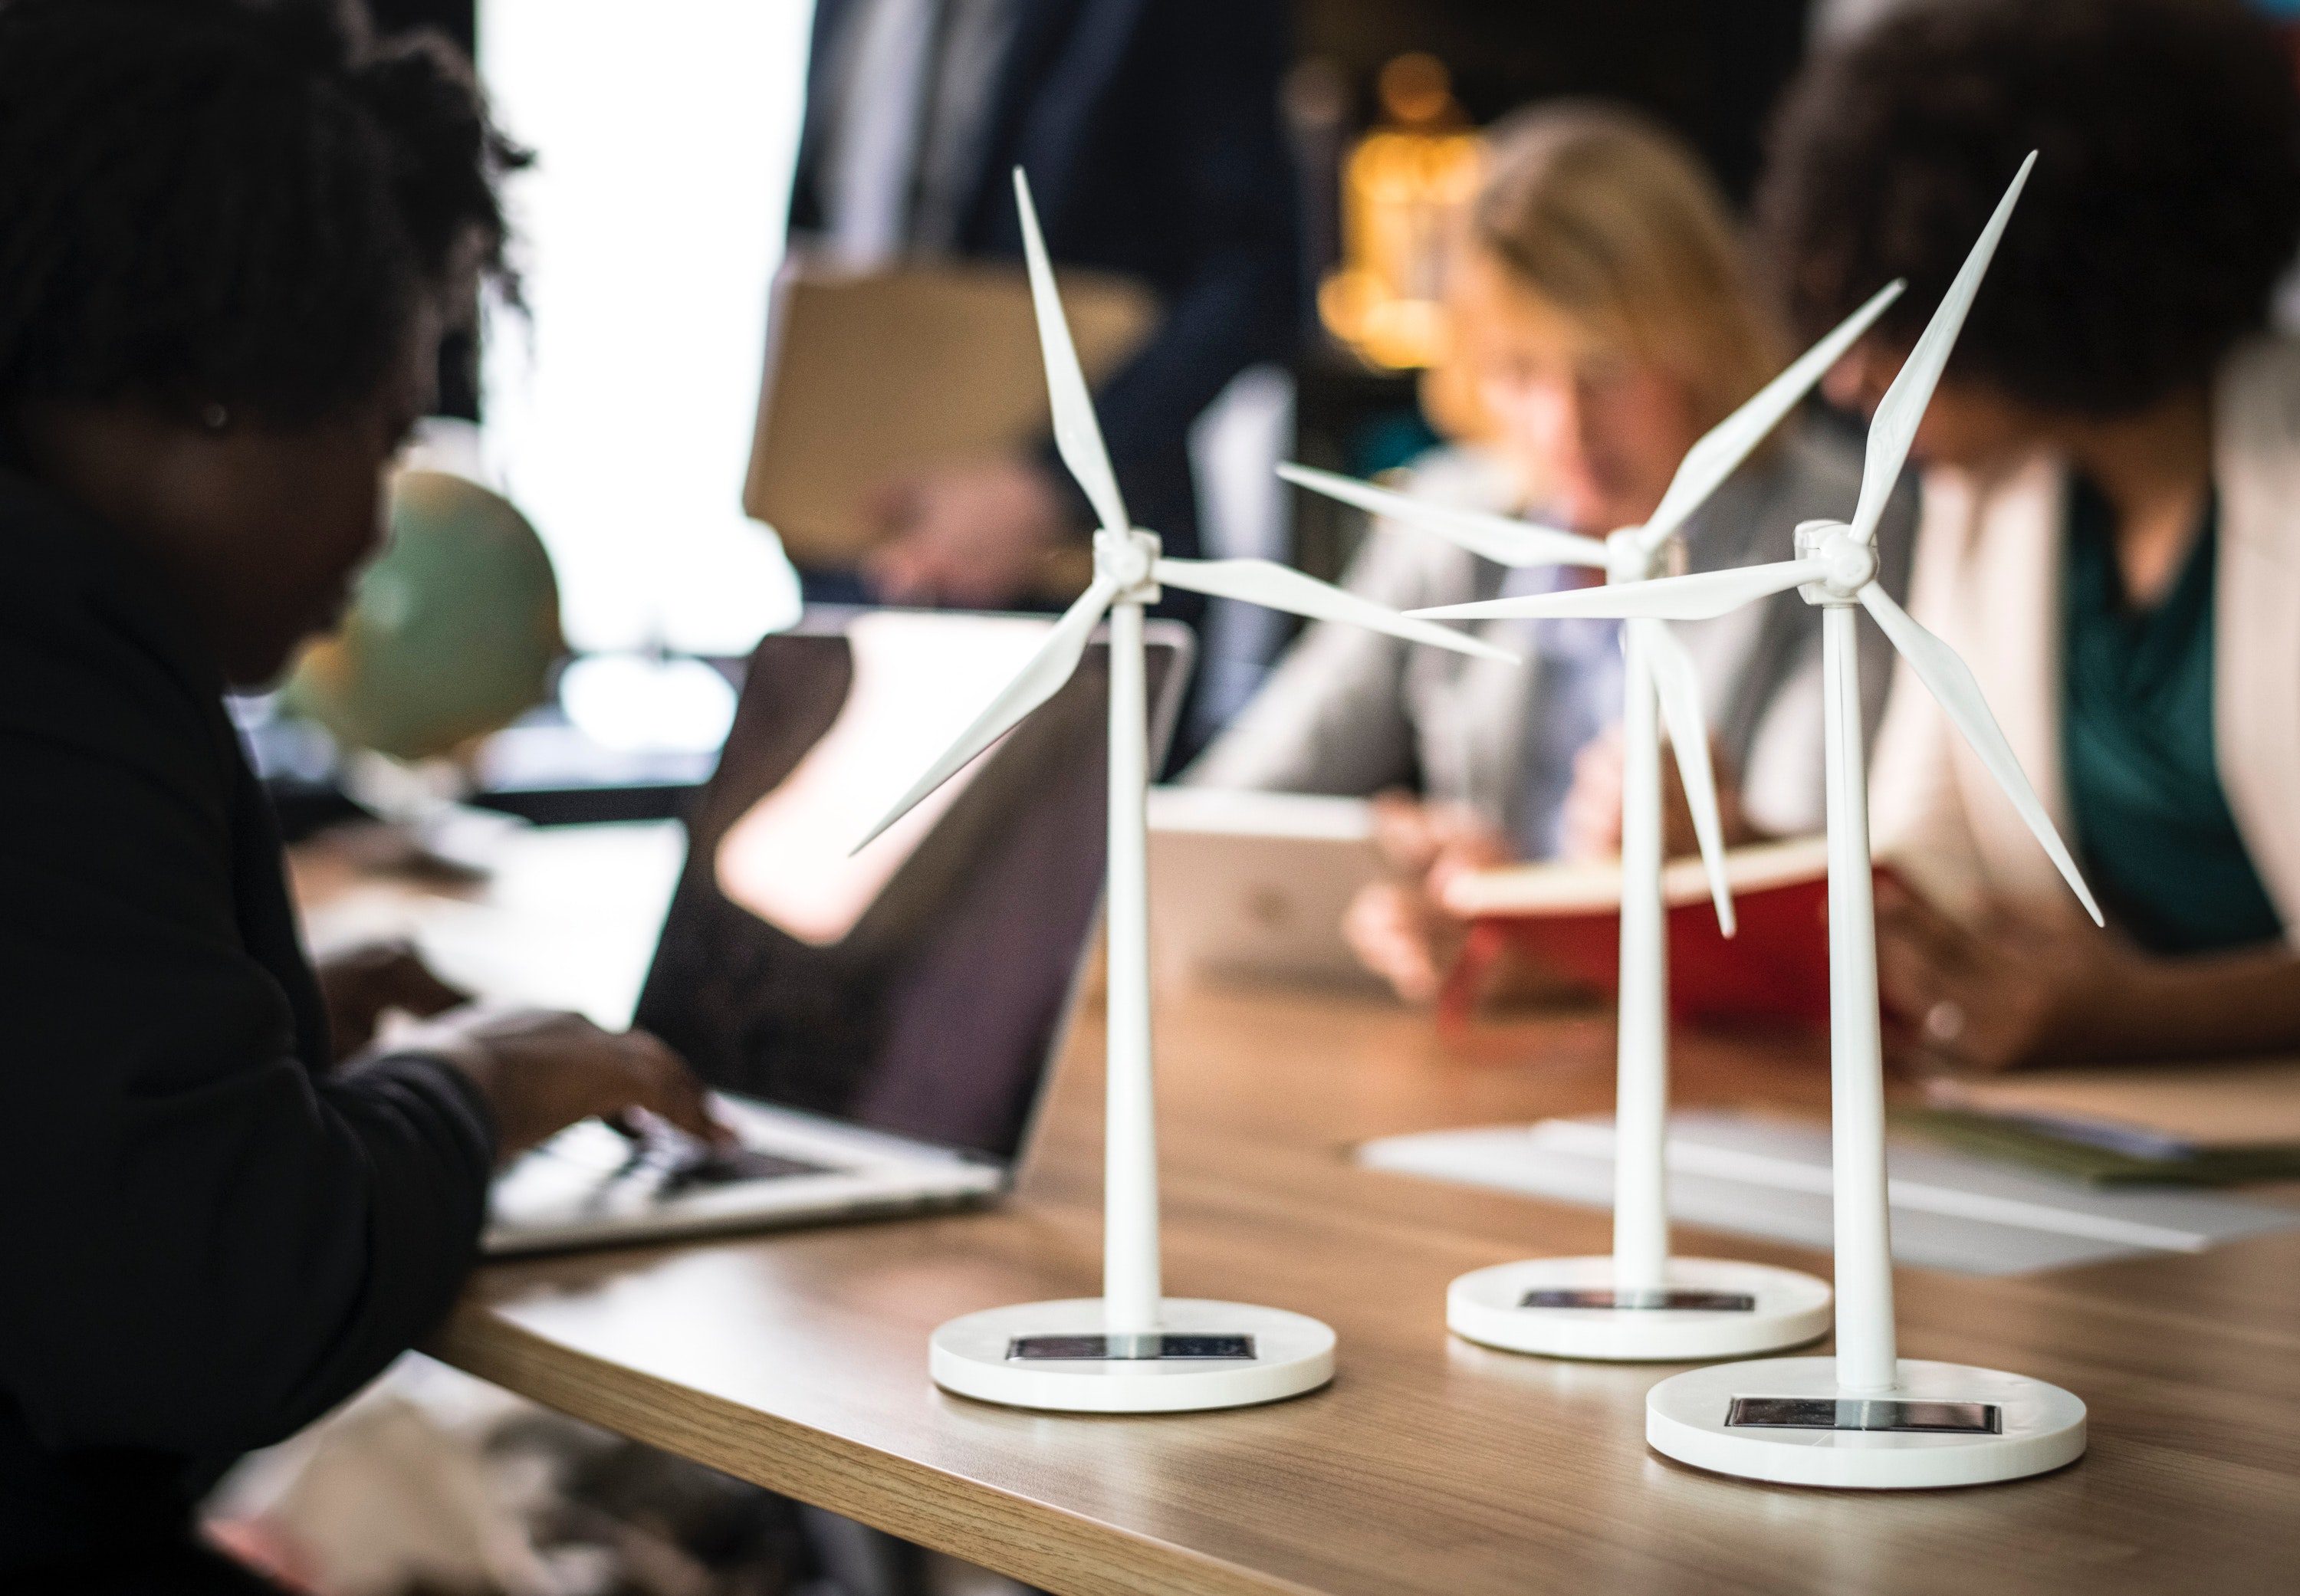 An image of small mock-ups of windmills on a boardroom table. People with computers are working in the background.